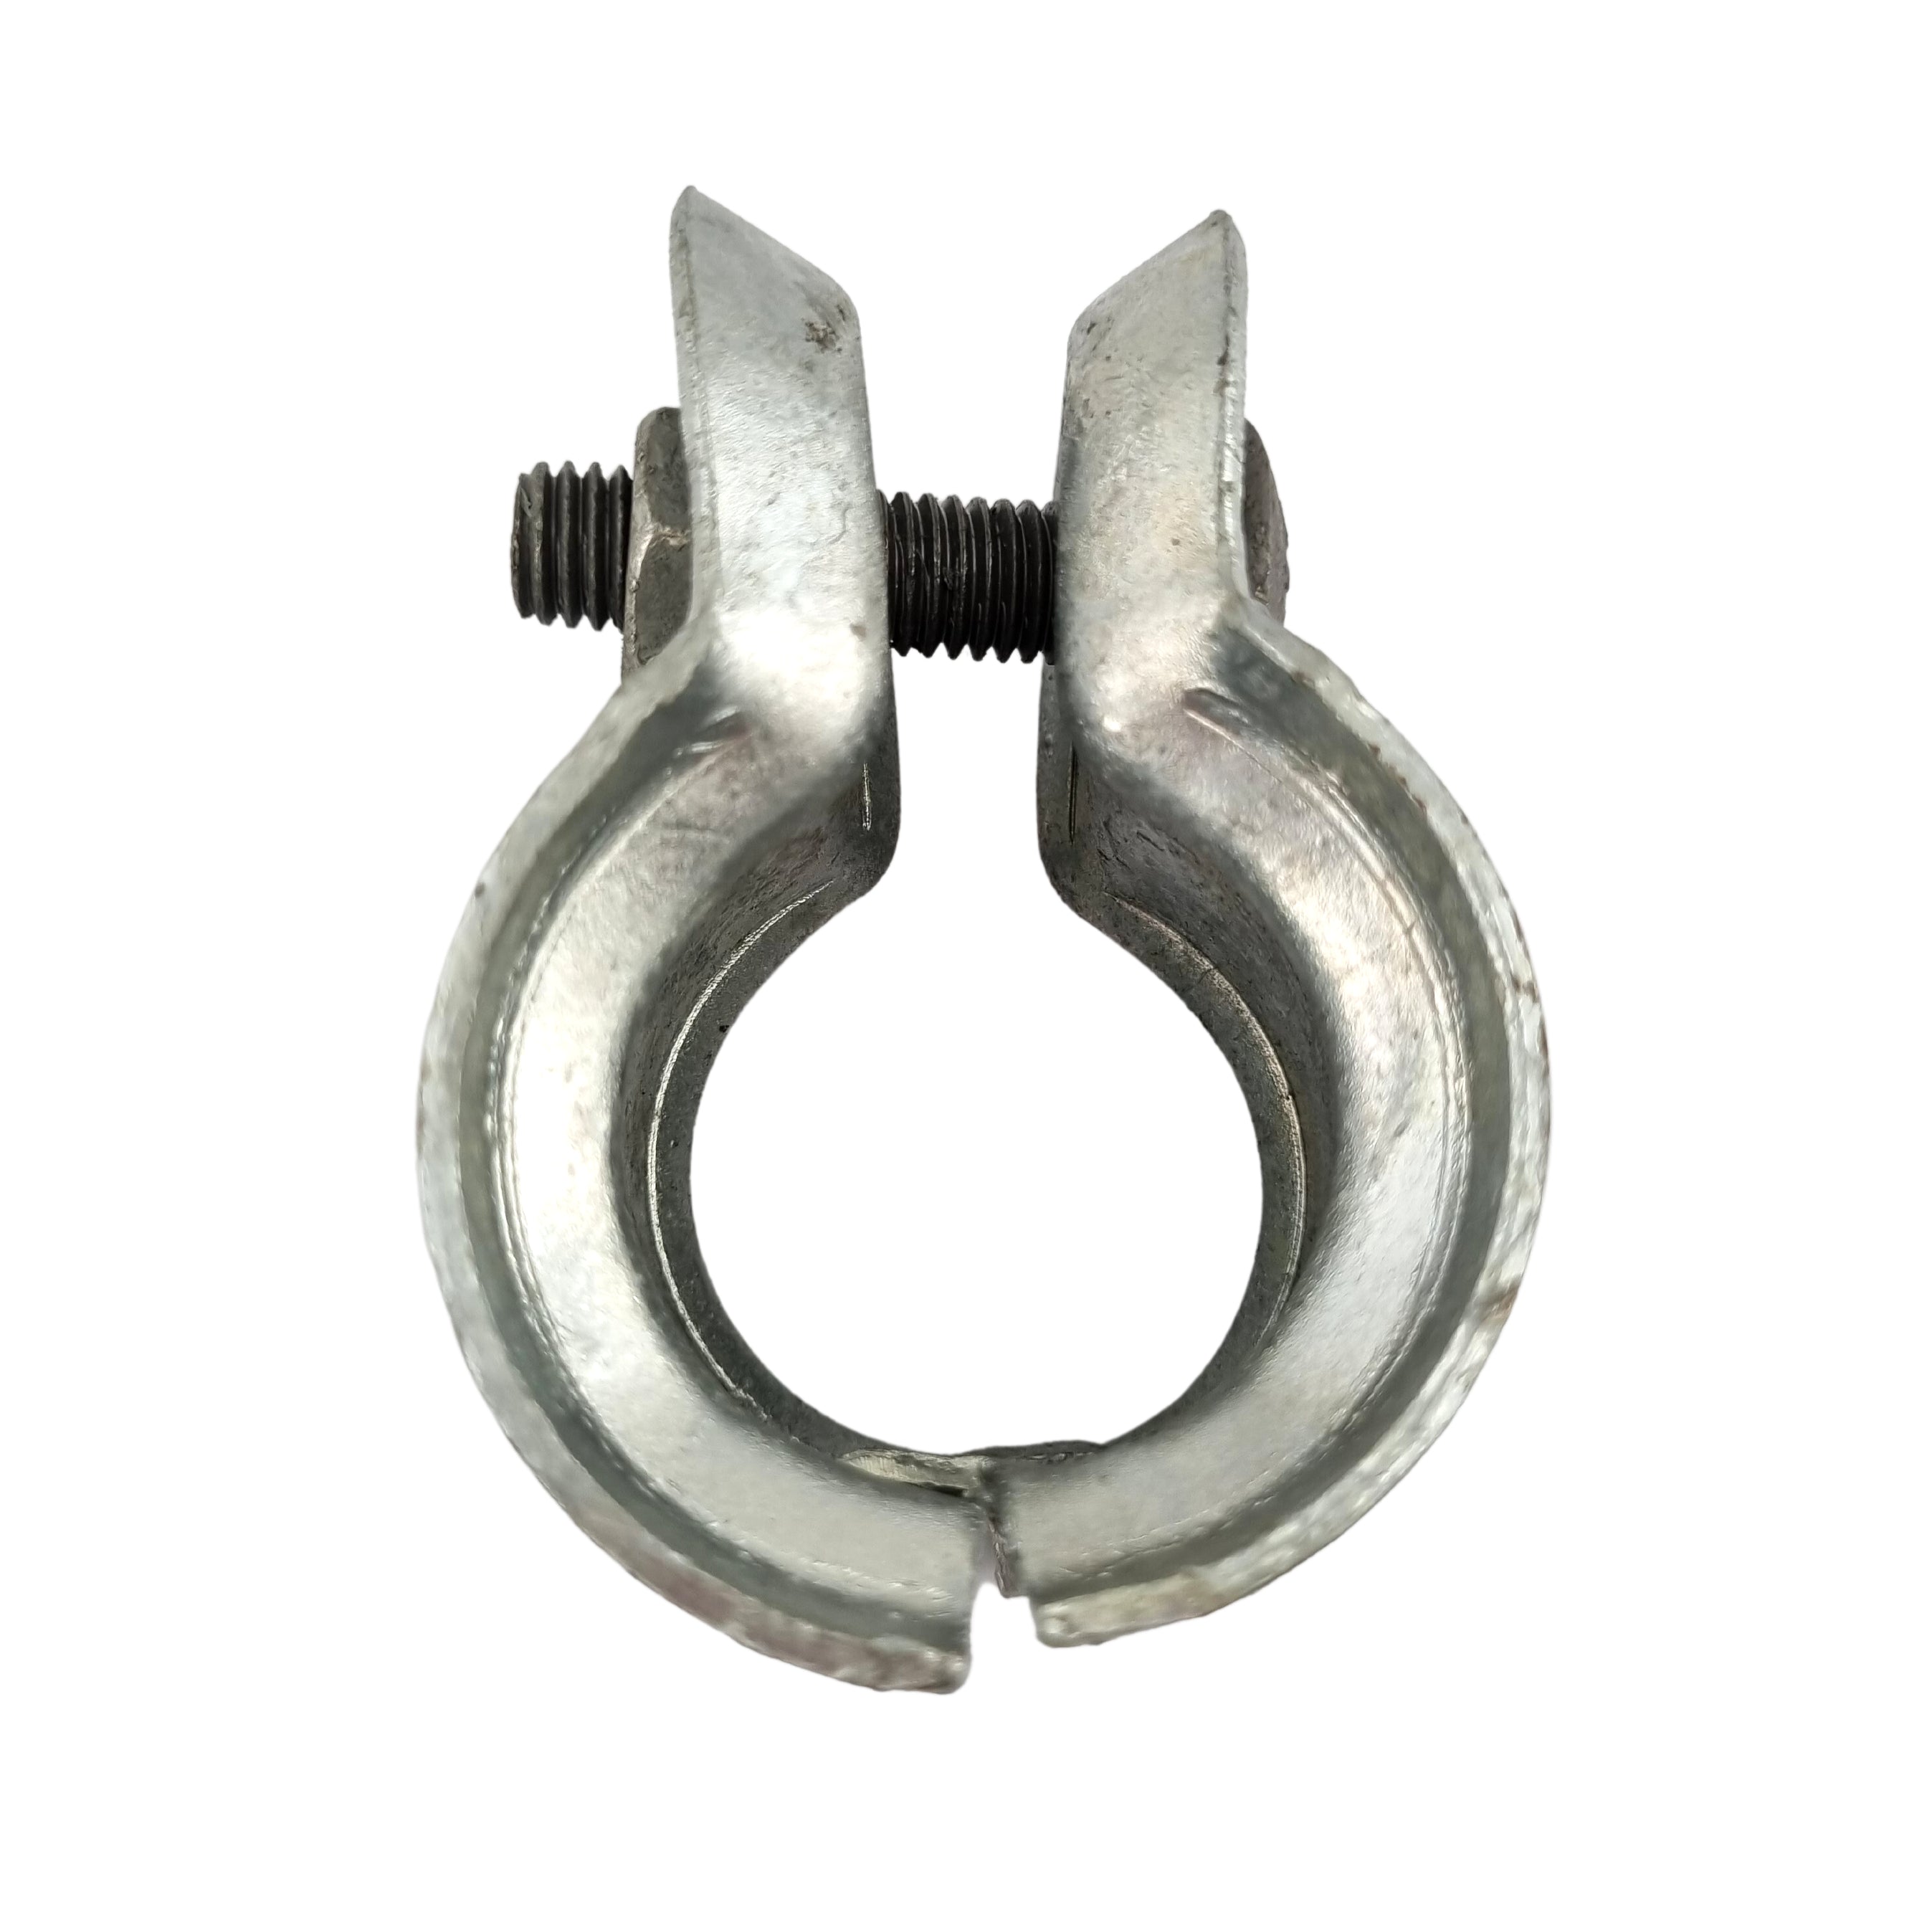 Universal Post Clamps in a galvanised finish, Australian made. Product code: UFFT. Various sizes. Shop Fence & Gate Fittings. Australia wide shipping. Chain.com.au